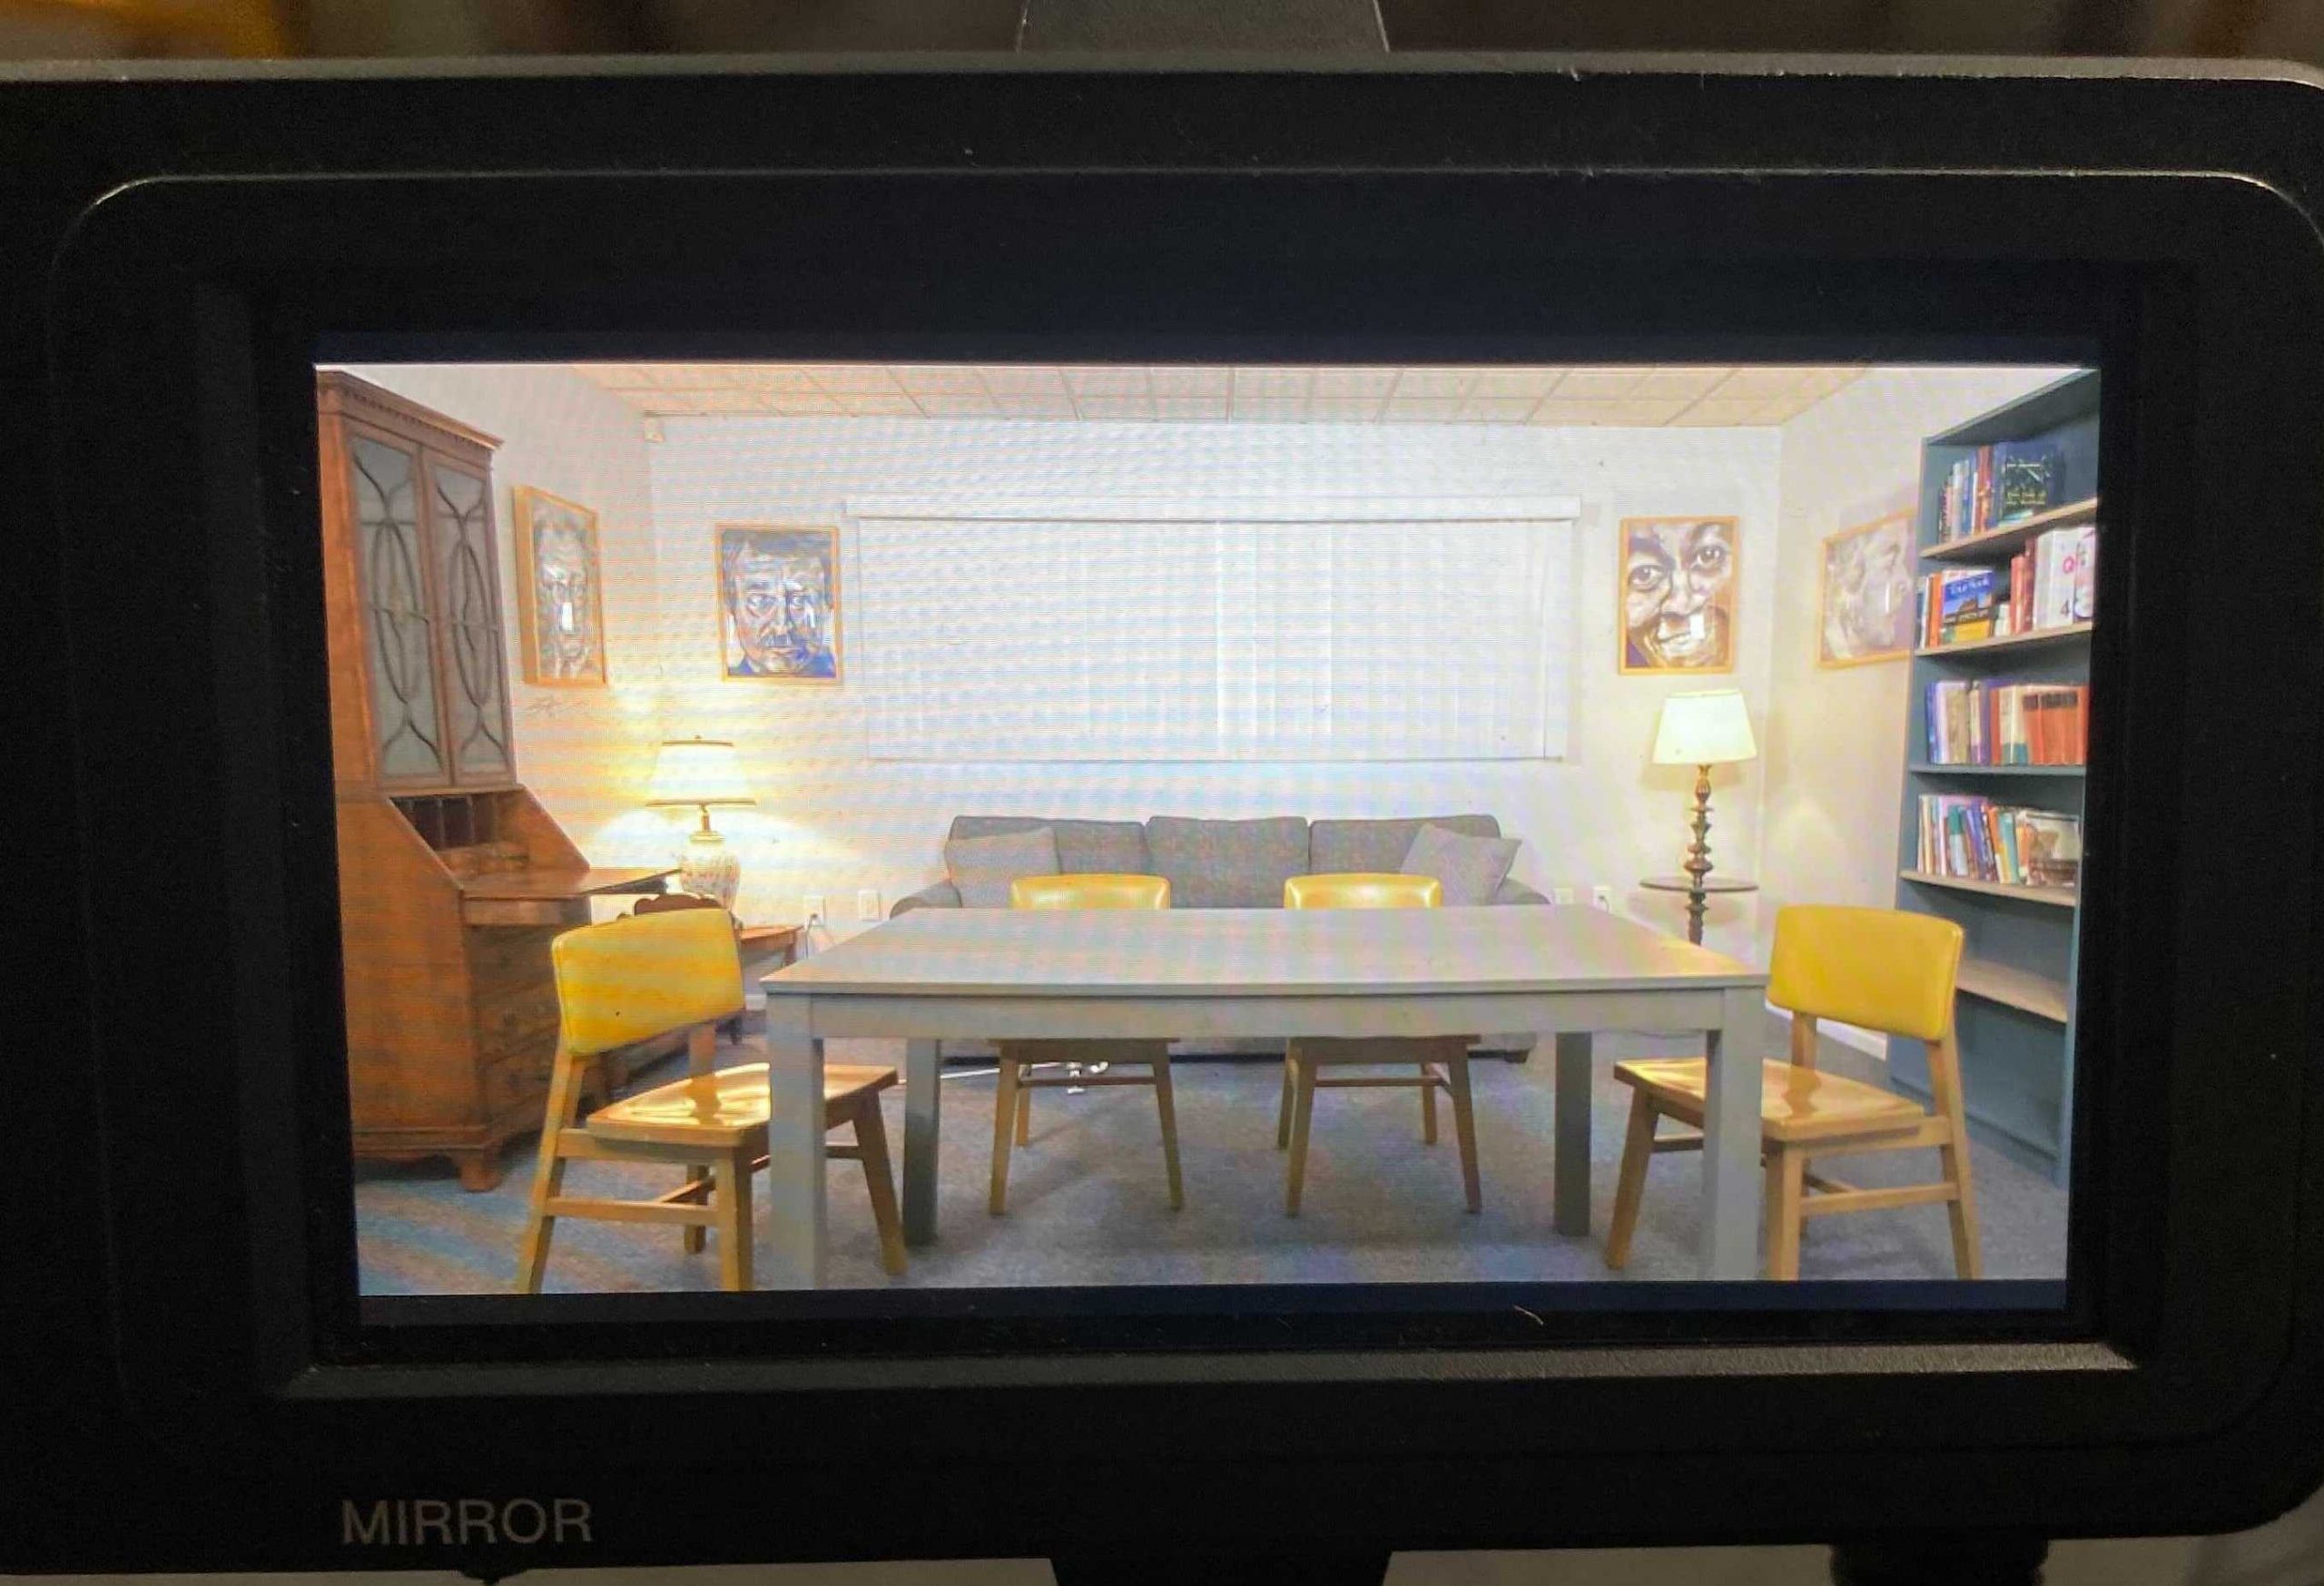 Poetry in America's Brighton, MA office, which has a gray table surrounded by four yellow chairs in the foreground and a sofa with two lamps on either side in the background.